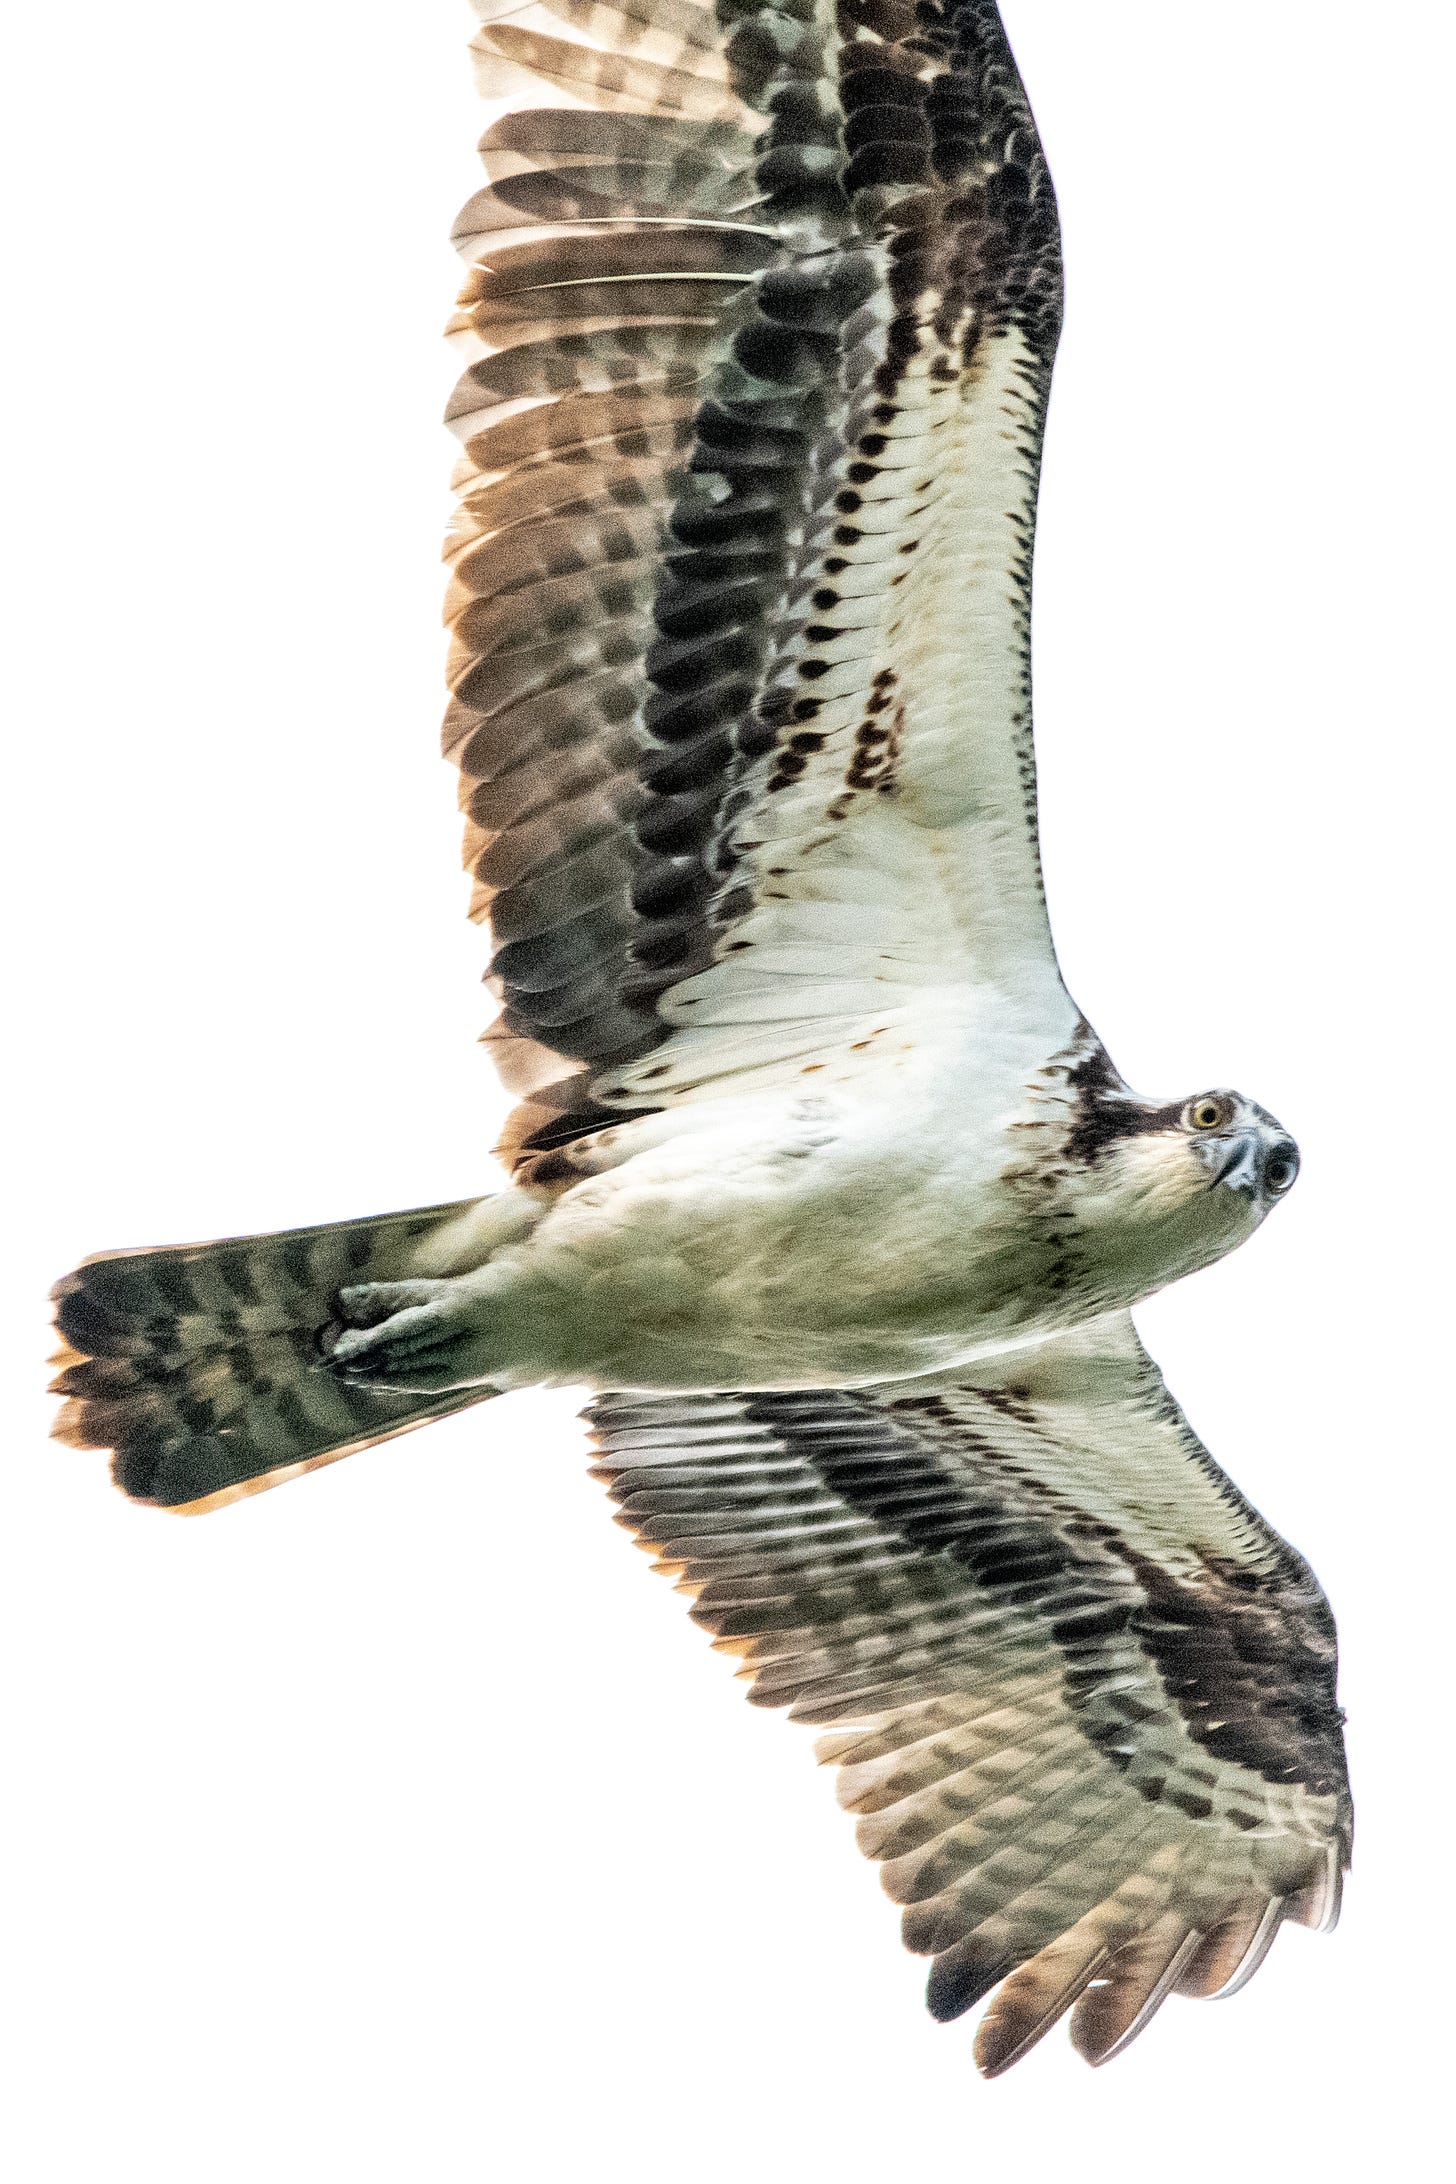 A close-up of an osprey flying by, with a googly-eyed look